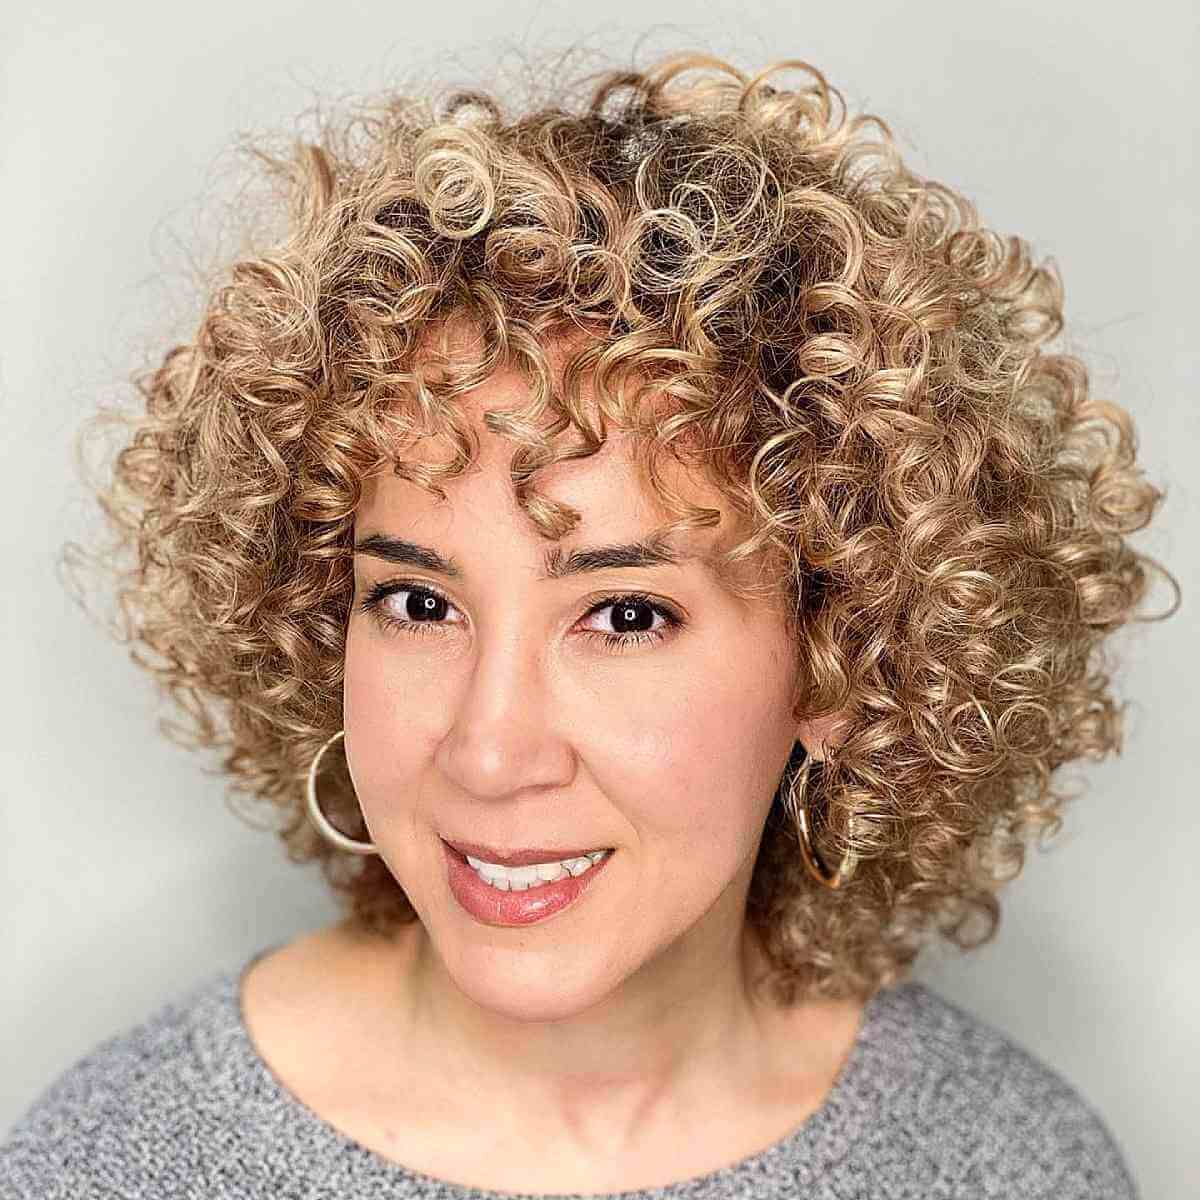 short curly hair for ladies in their 40s